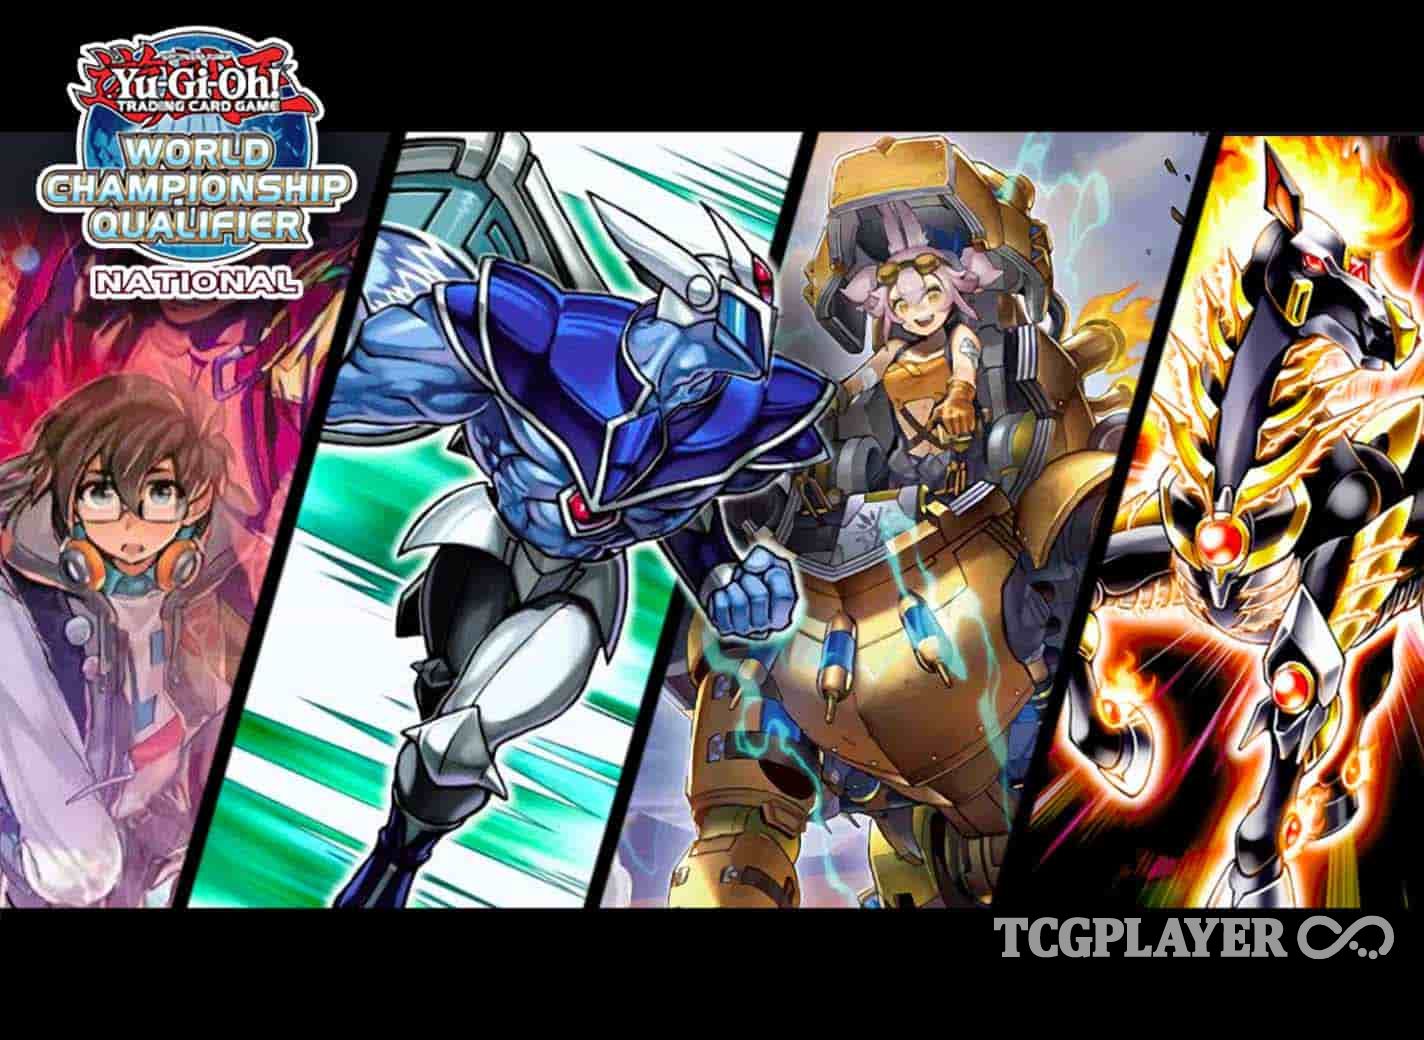 THE 2023 YU-GI-OH! NATIONAL CHAMPIONSHIPS BEGIN IN MAY, WITH